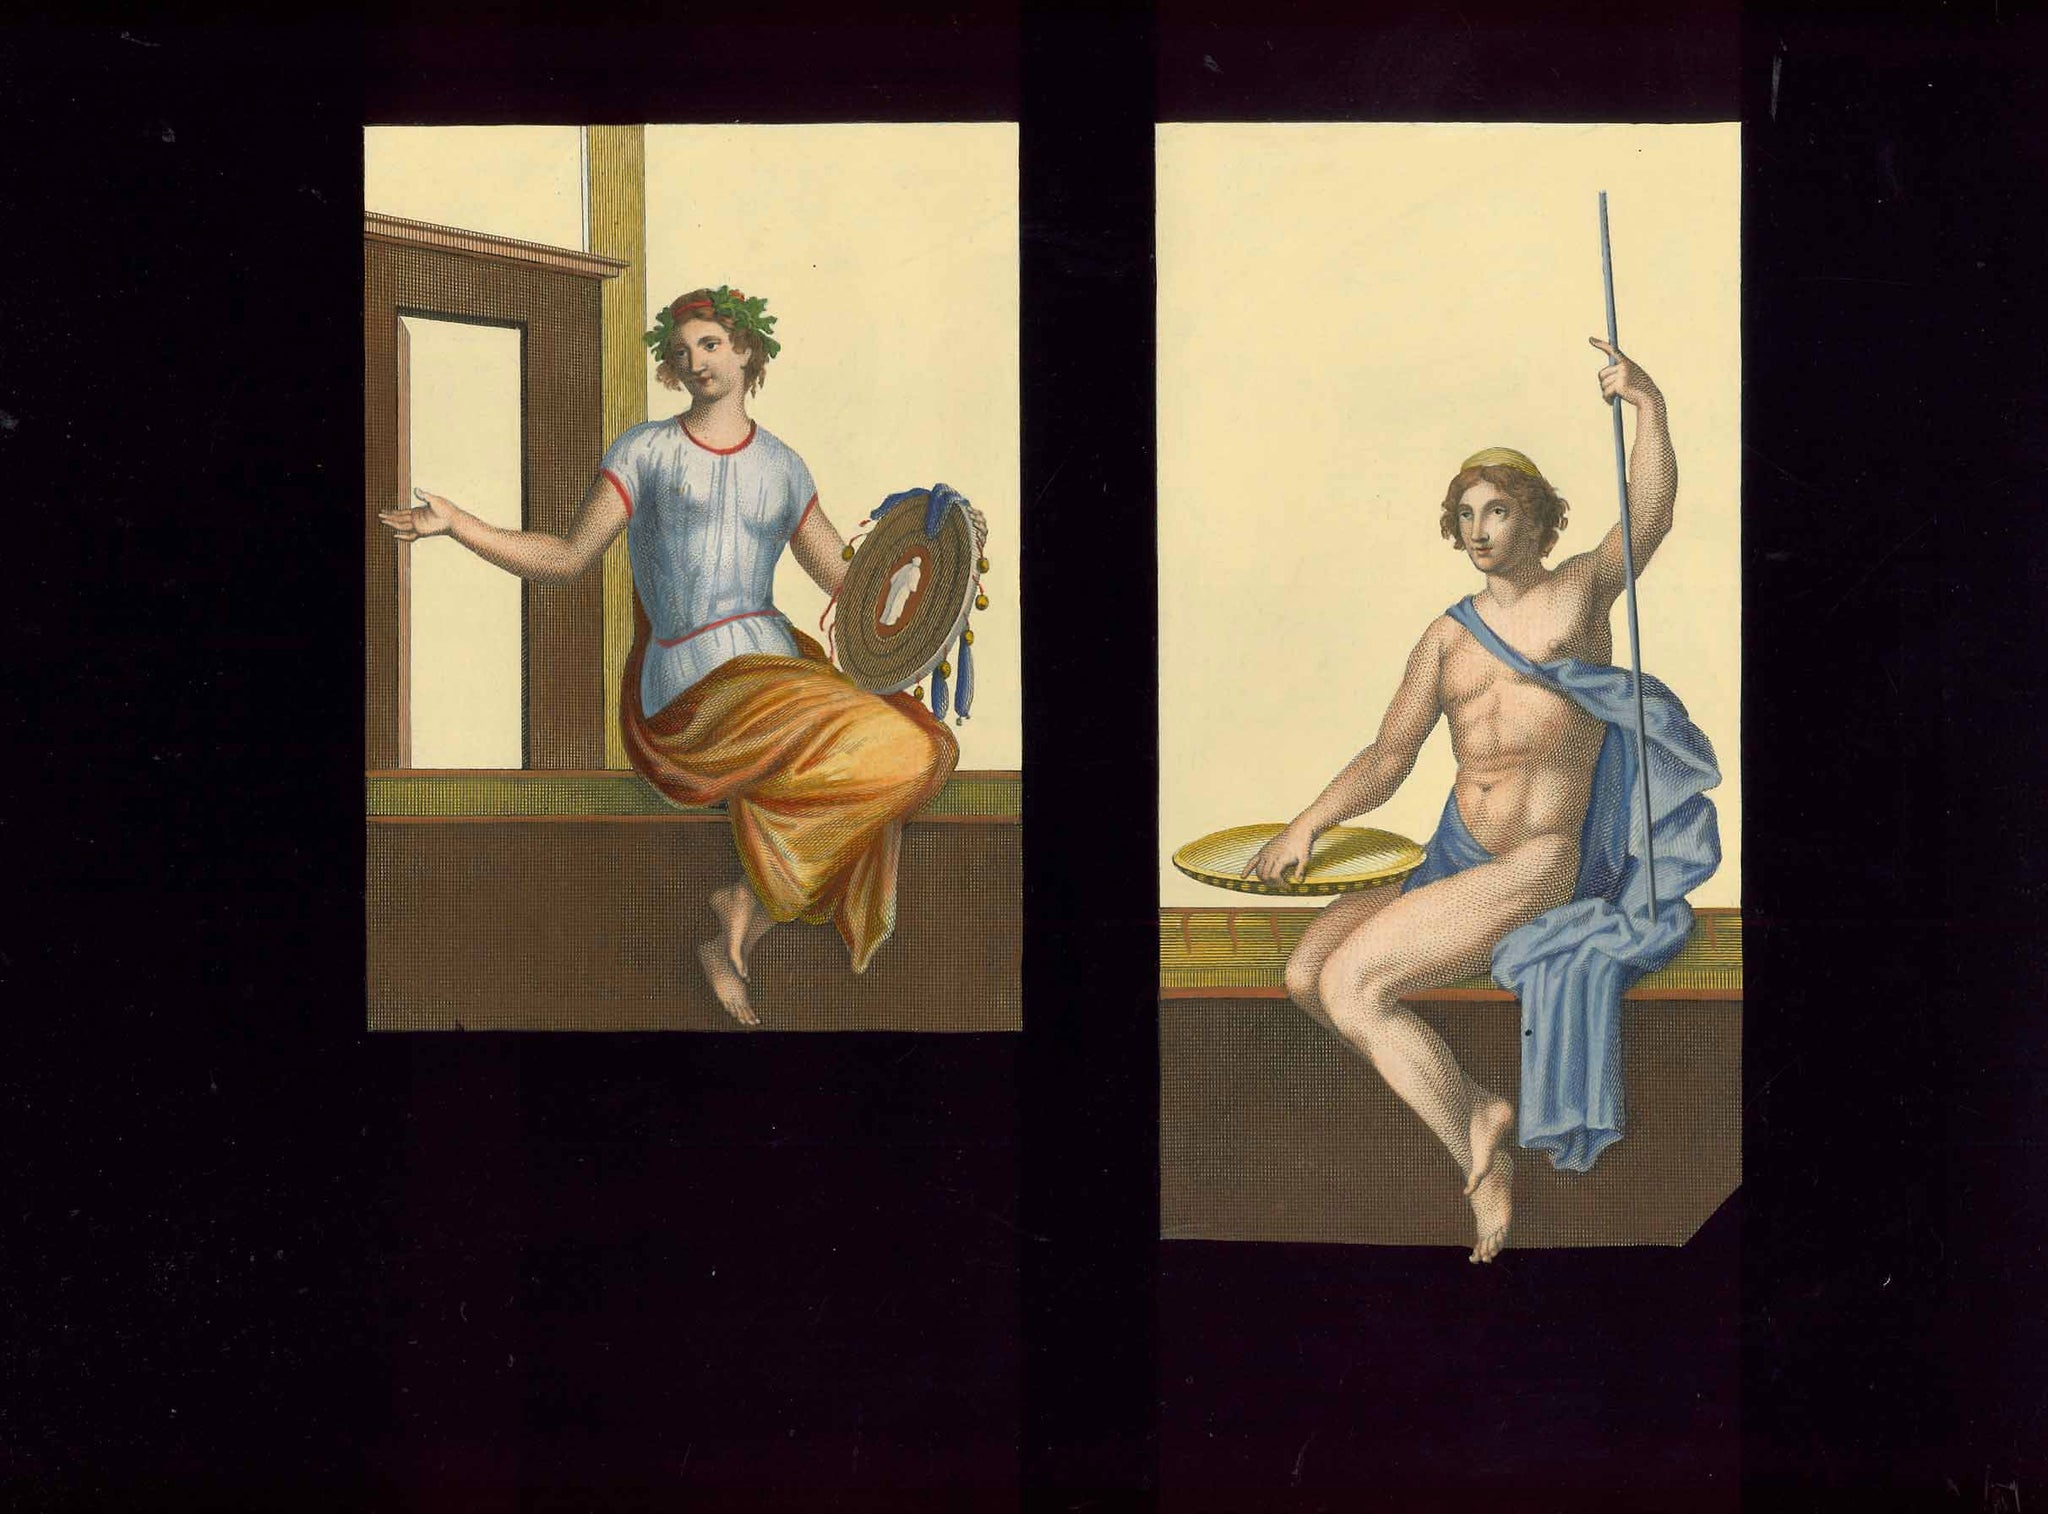 No title. Left: A girl (with musical instrument?" Right: Young nude man sitting on a bench  Anonymous hand-colored (gouache) copper etching.  Published in "Le Antichita di Ercolano esposte"  An 8-volume work on the antiquities found during the excavations of Herculaneum.  Naples, 1757-1792